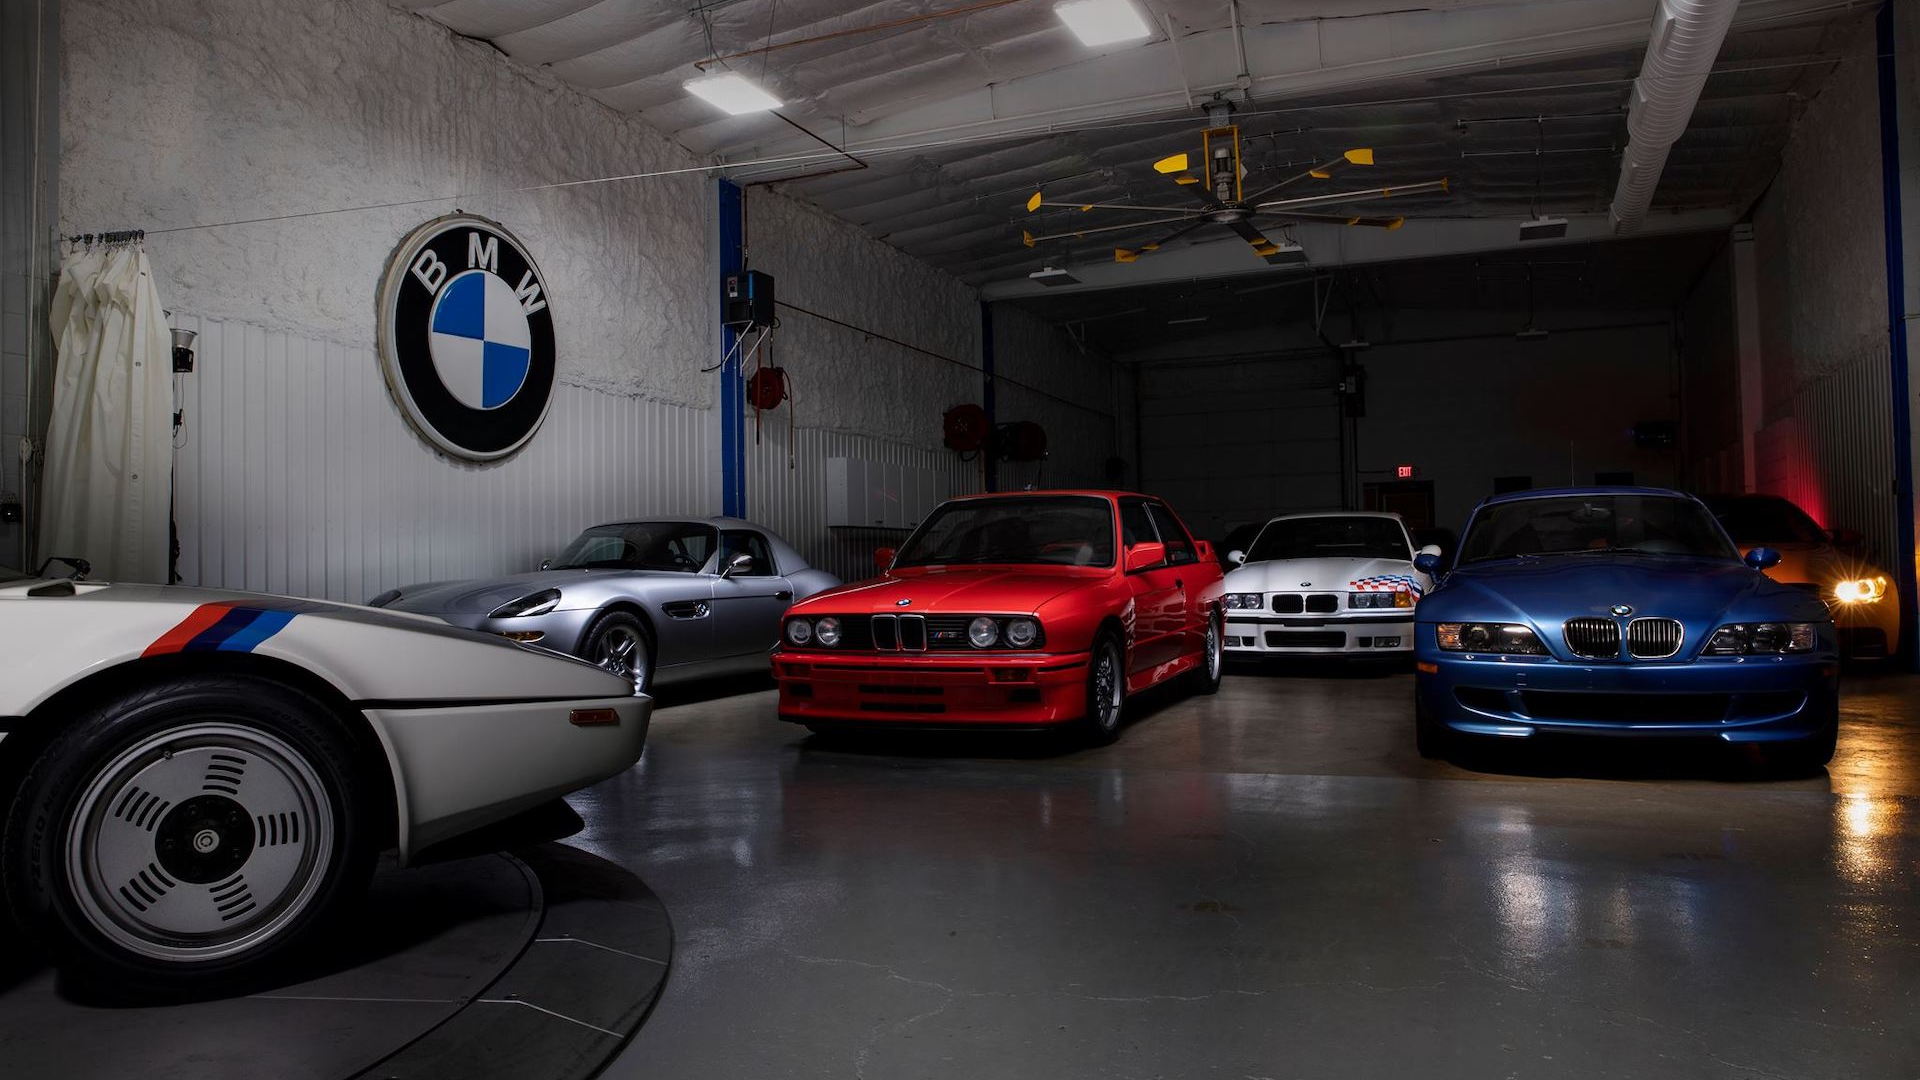 BMW legends collection up for sale